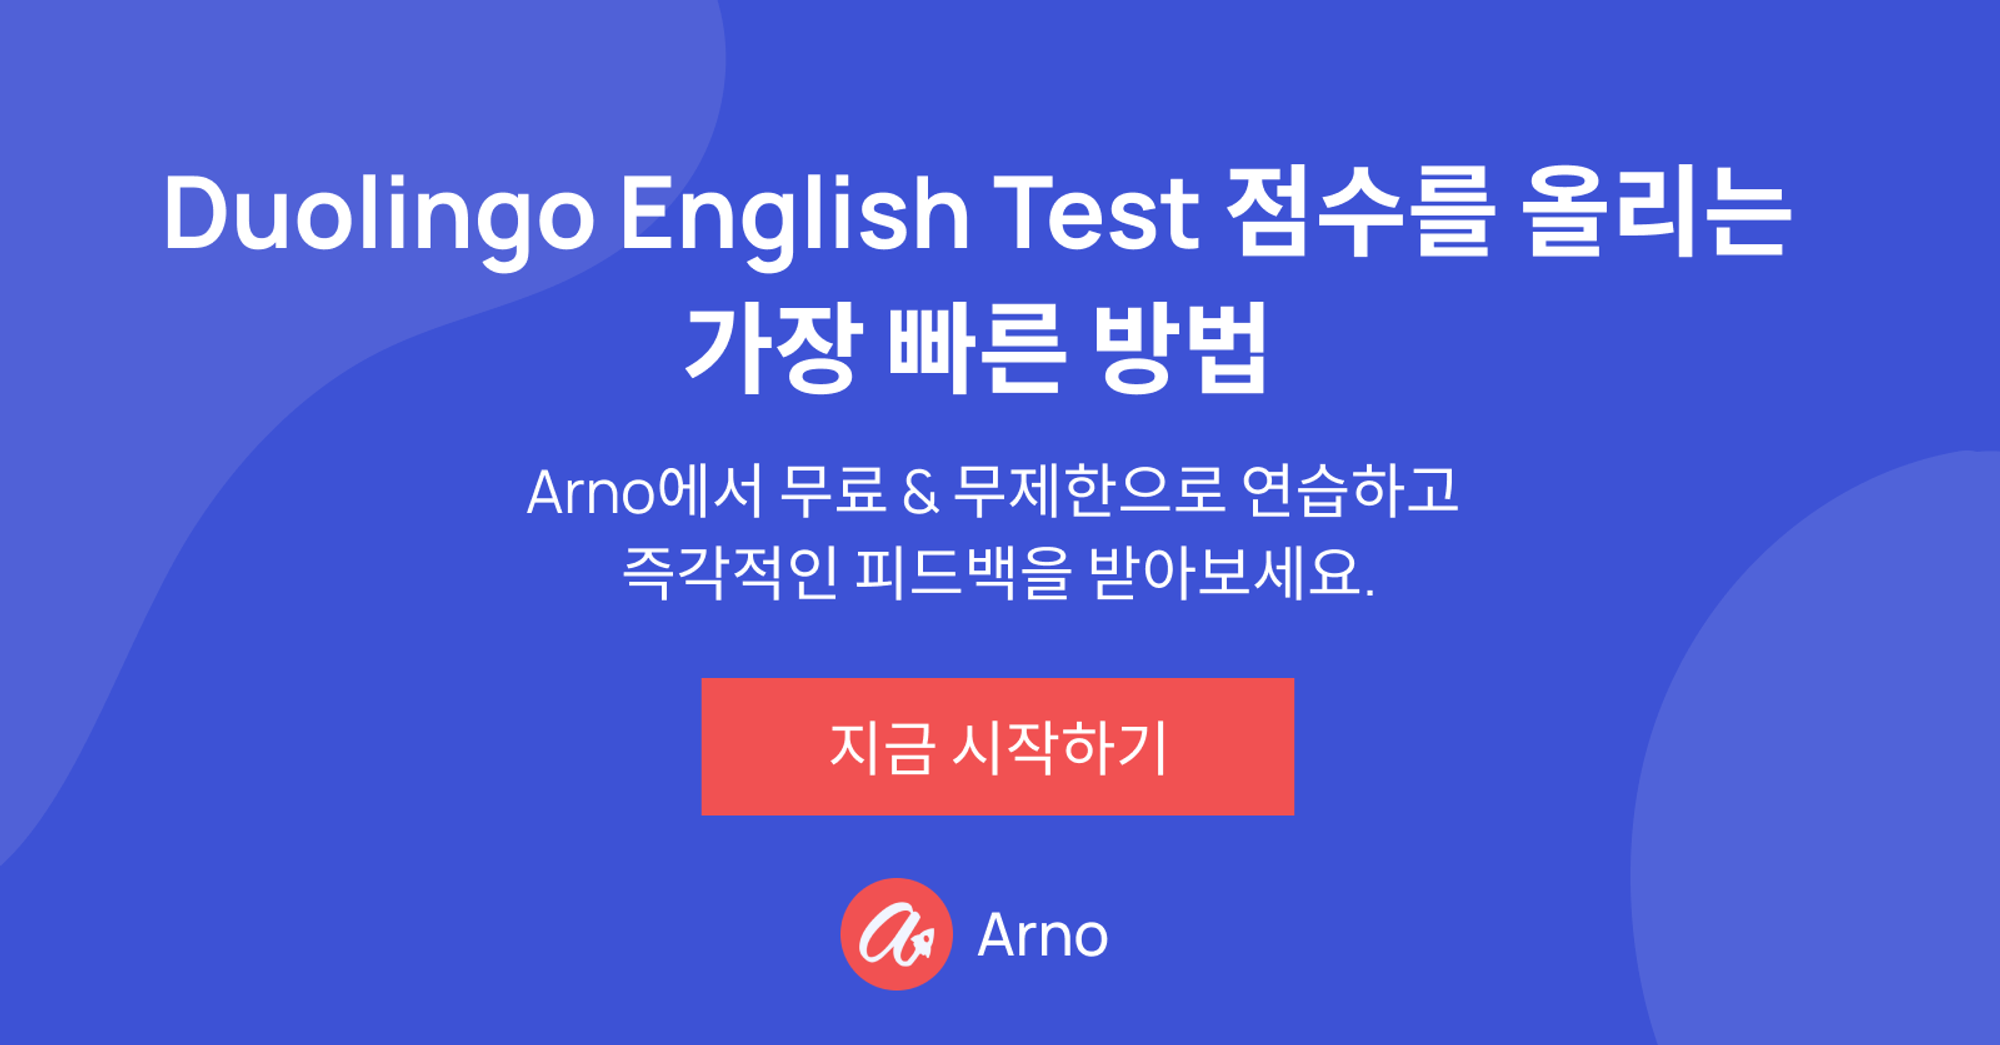 Try more practice questions on Arno today!